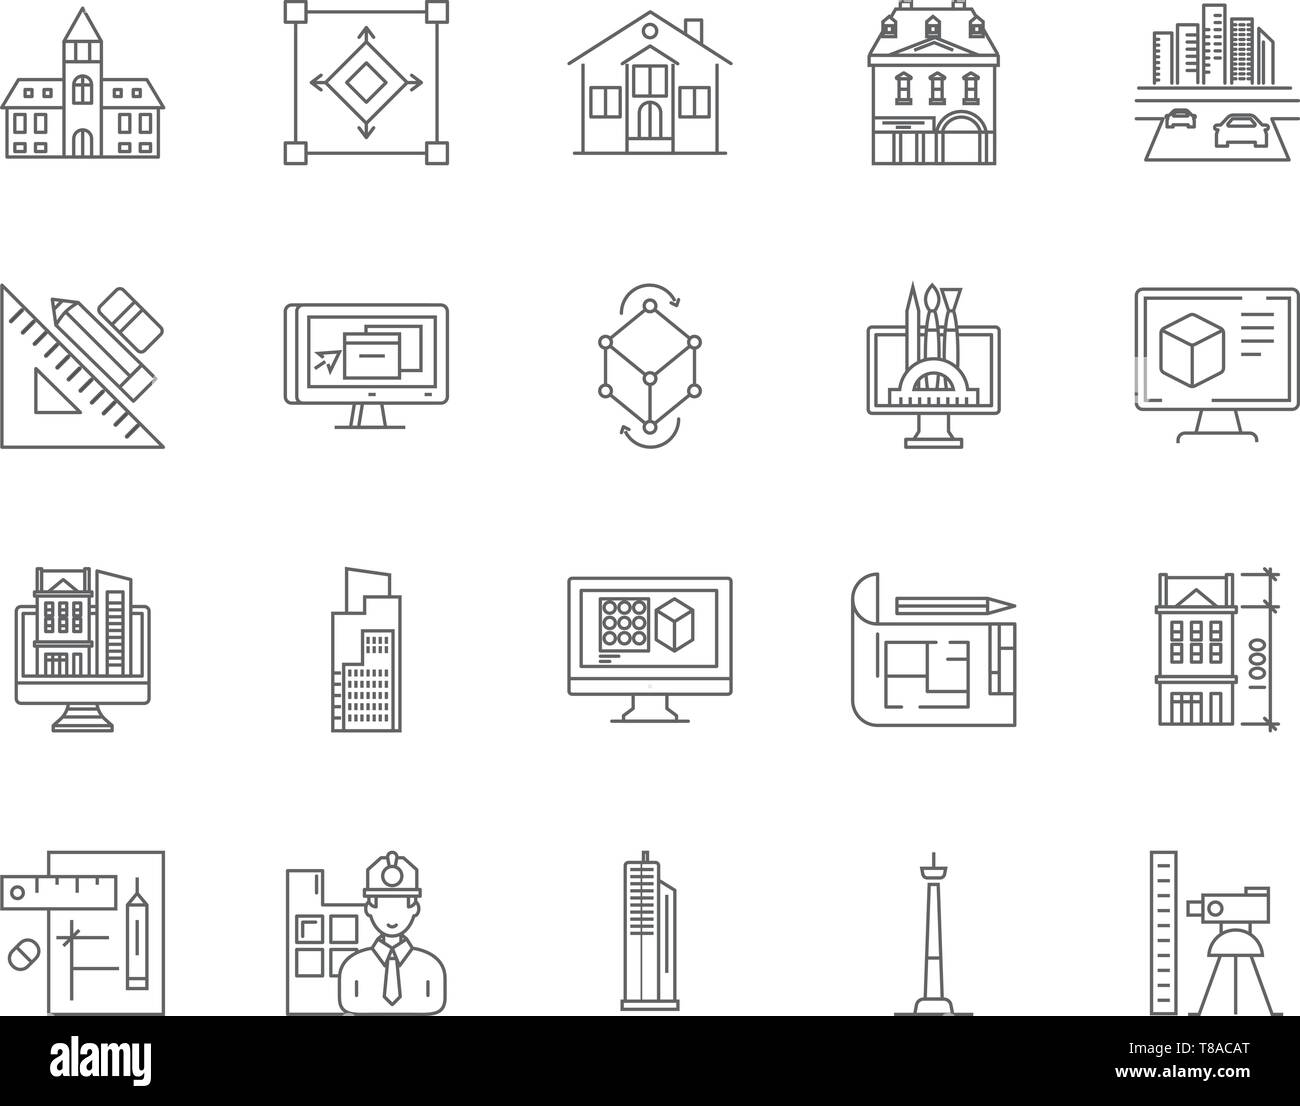 Architechtural services line icons, signs, vector set, outline illustration concept  Stock Vector